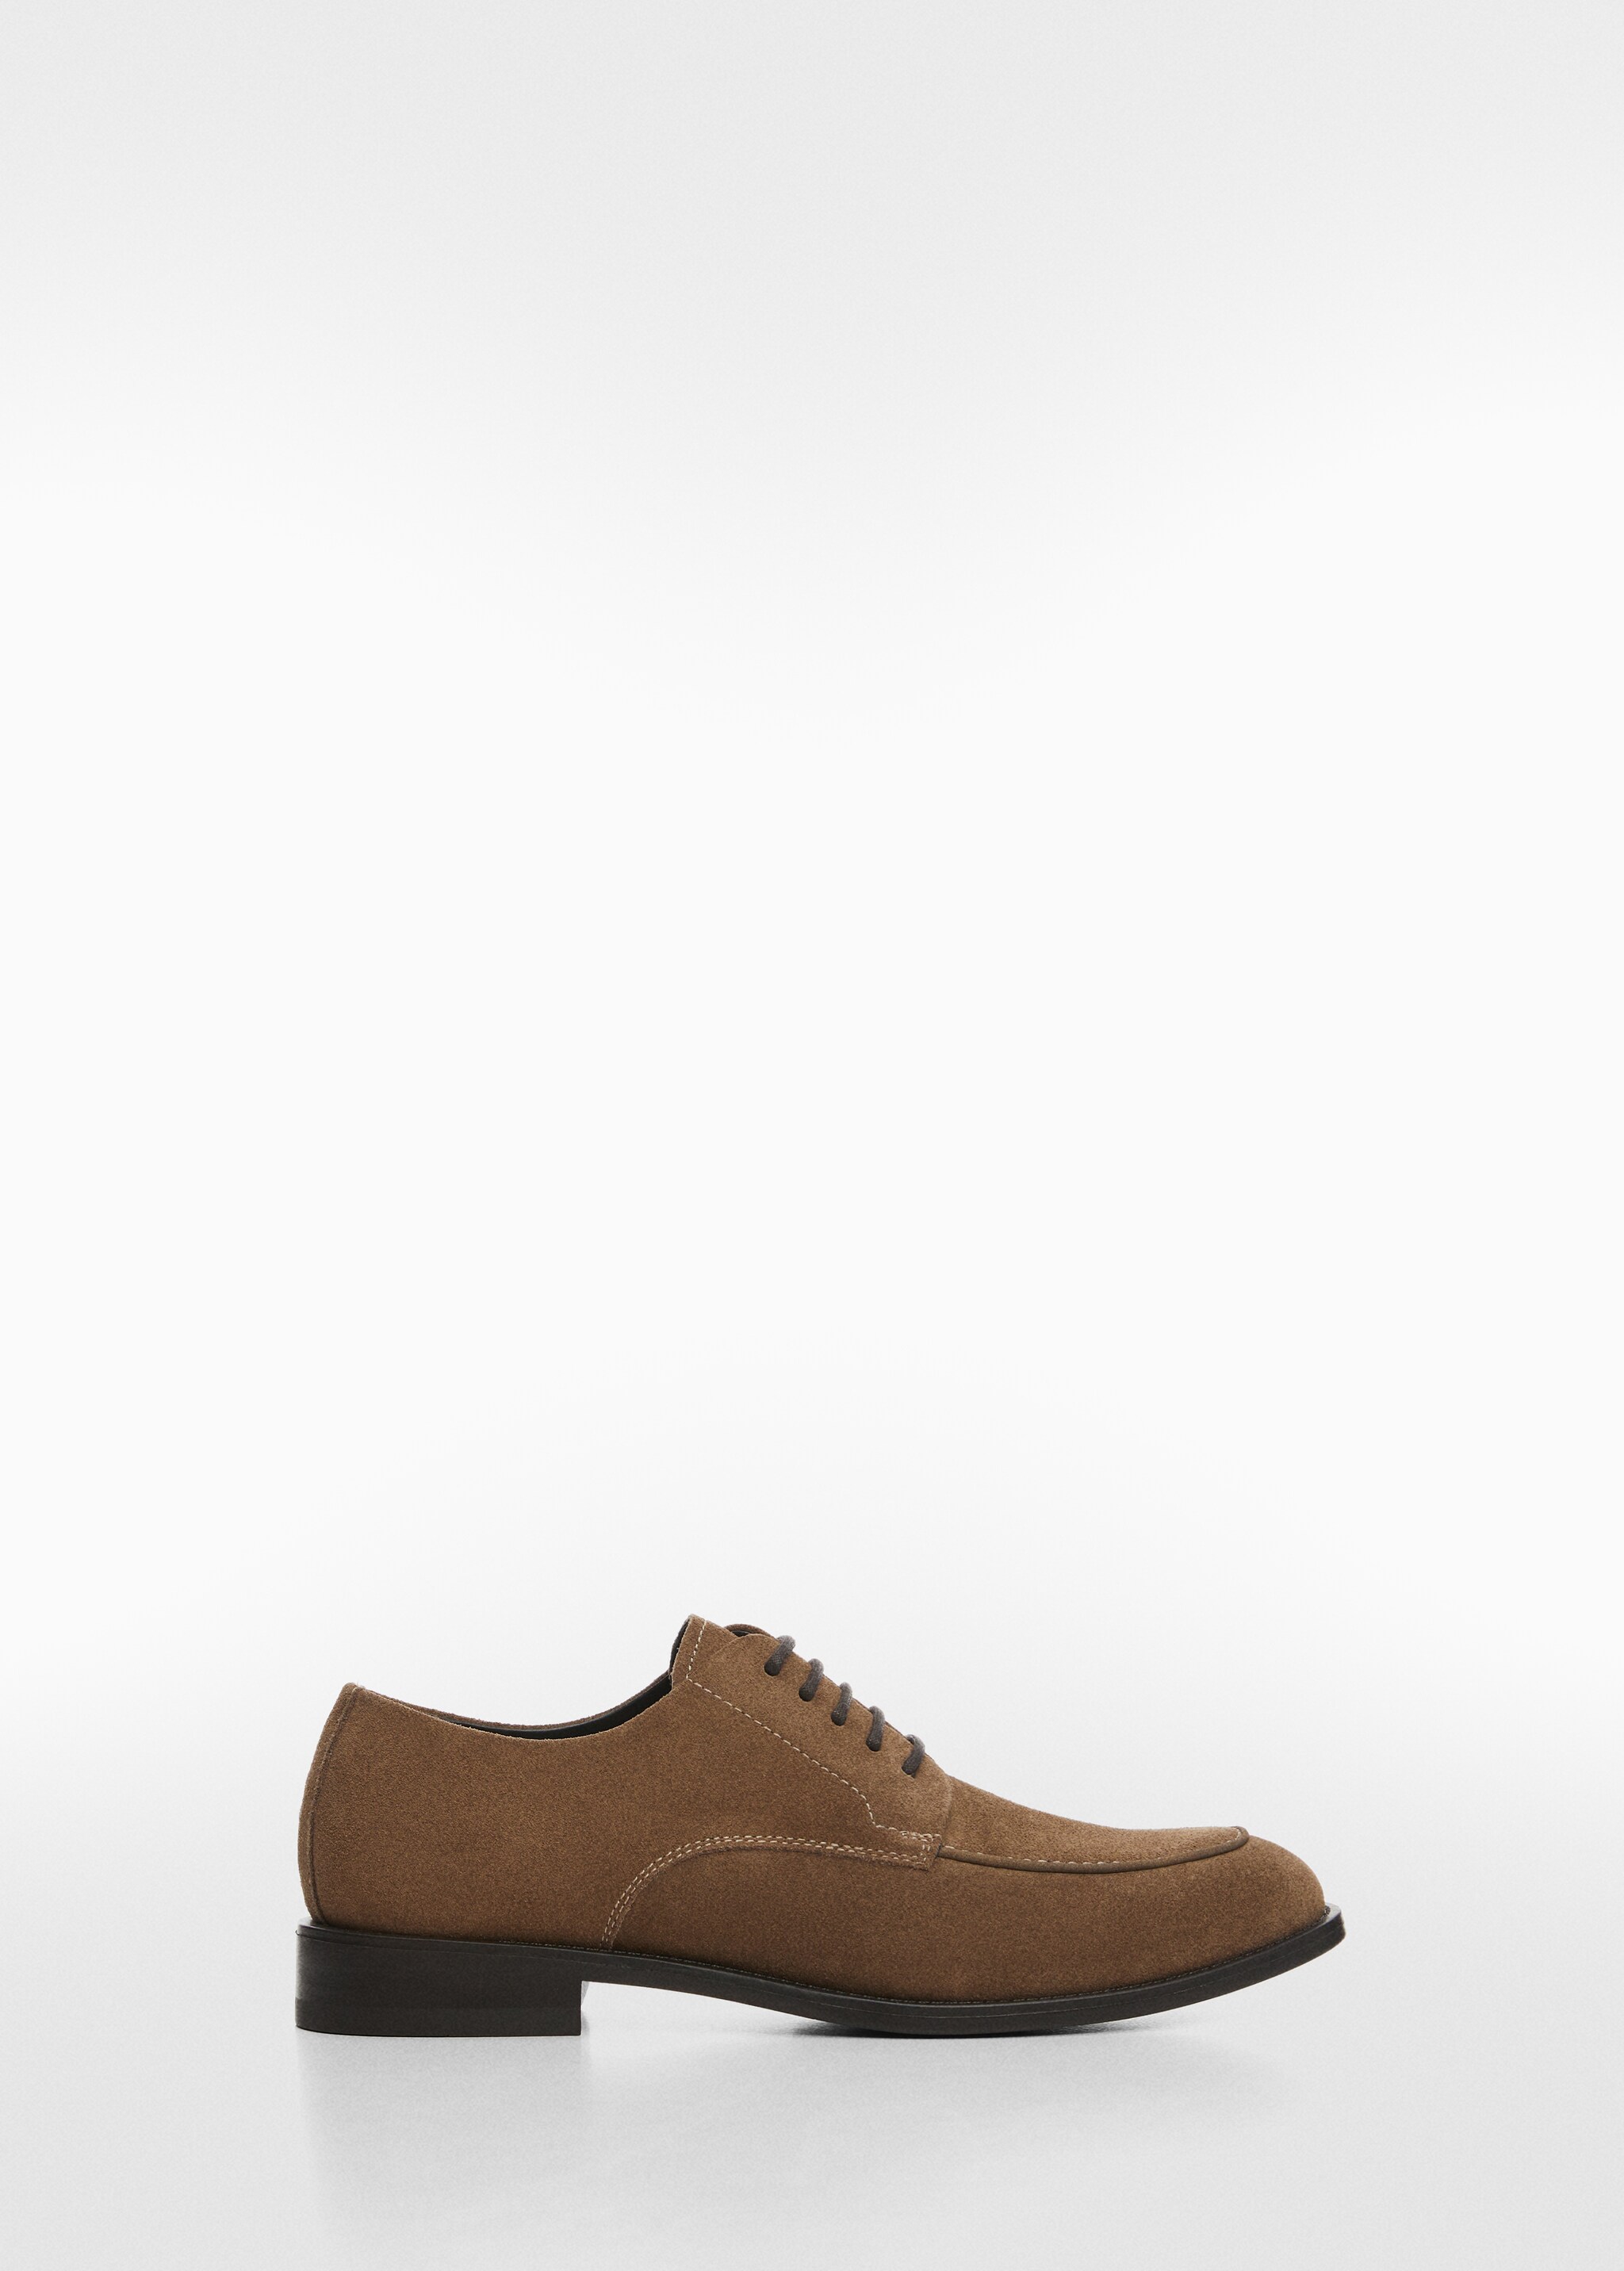 Suede lace-up shoes - Article without model